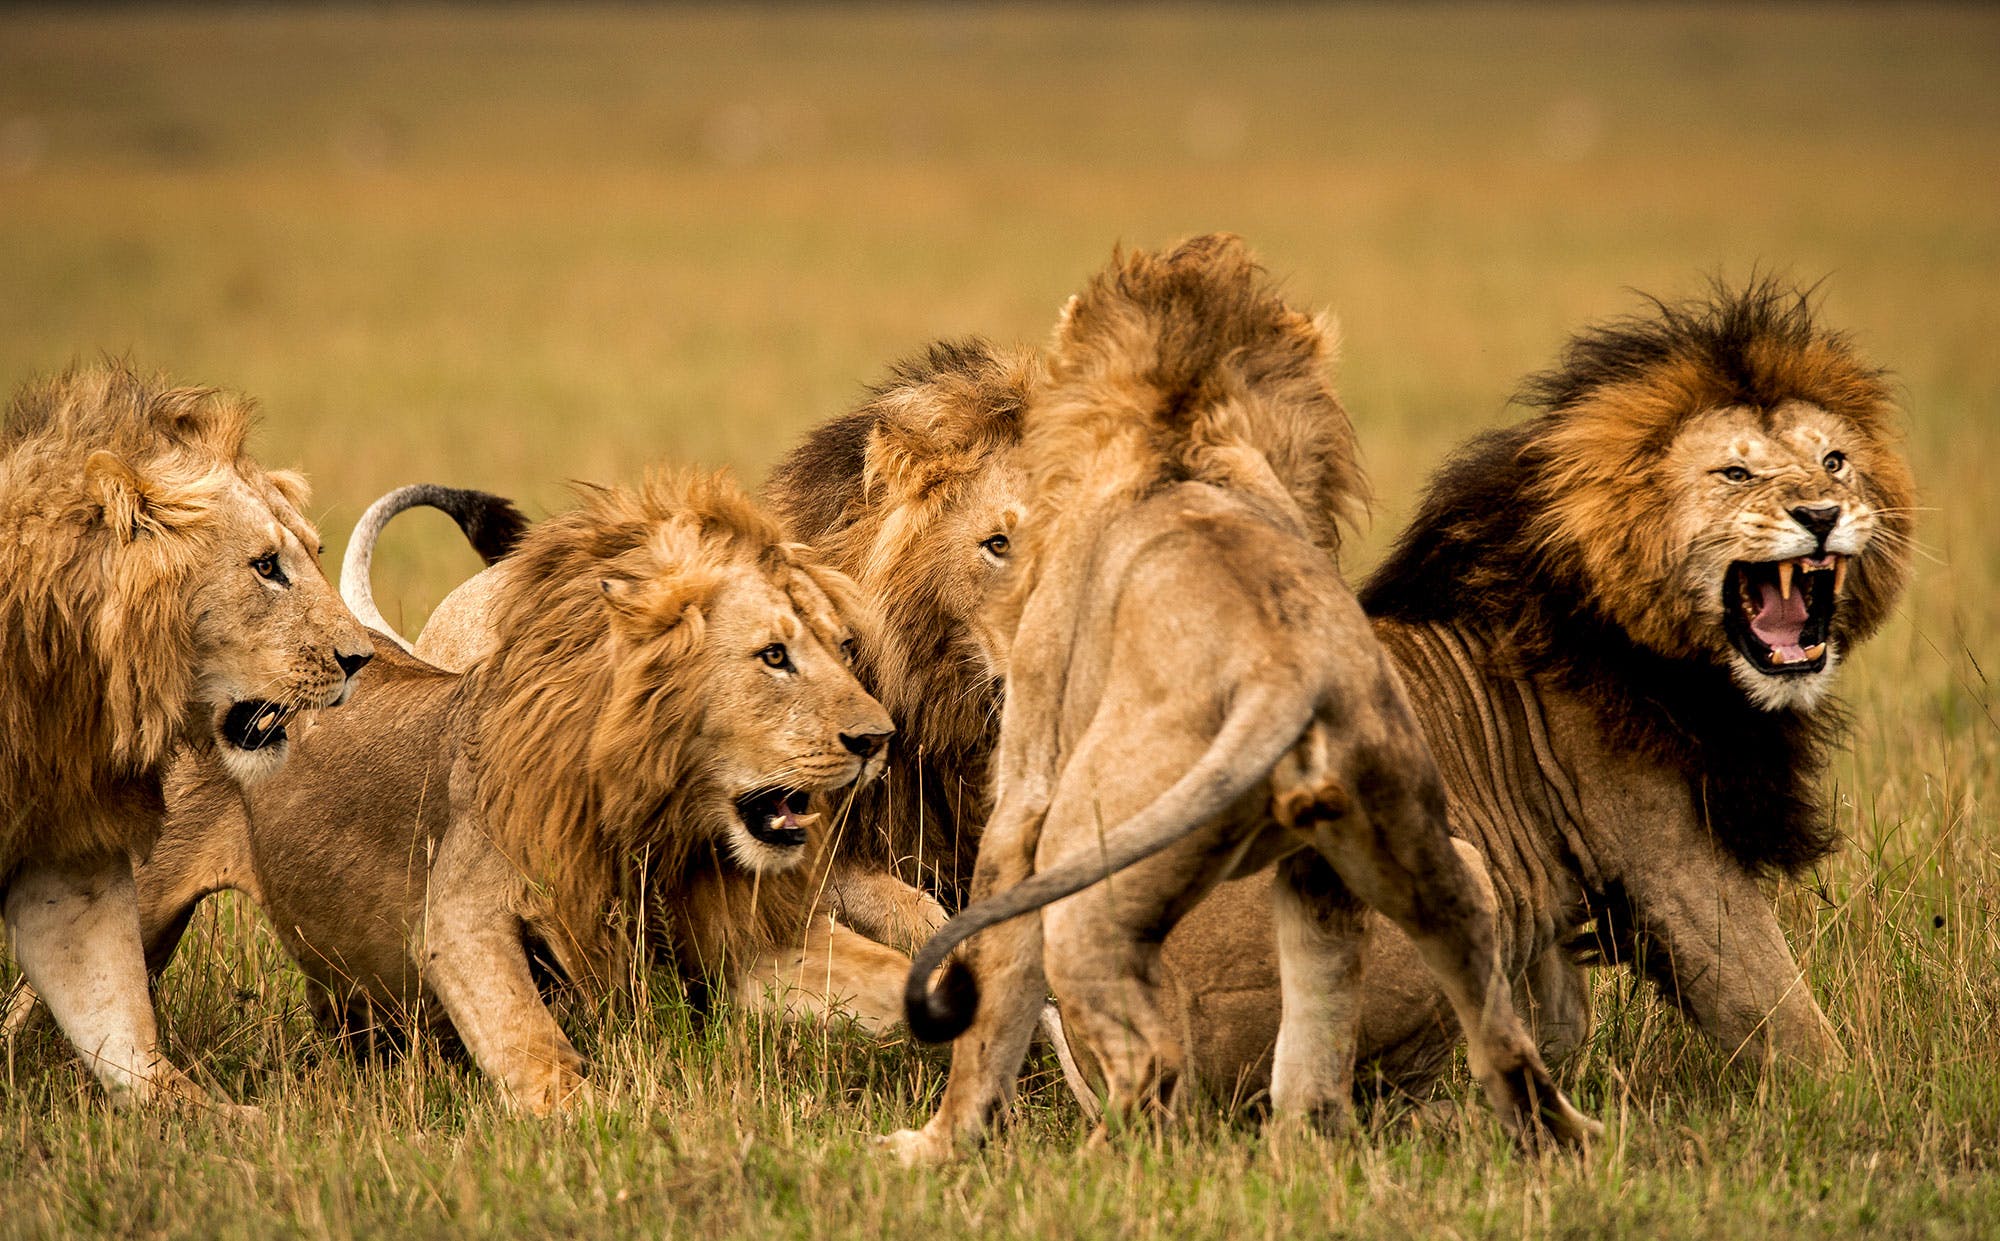 A pride of lions [Photo: Animal Care Fund]